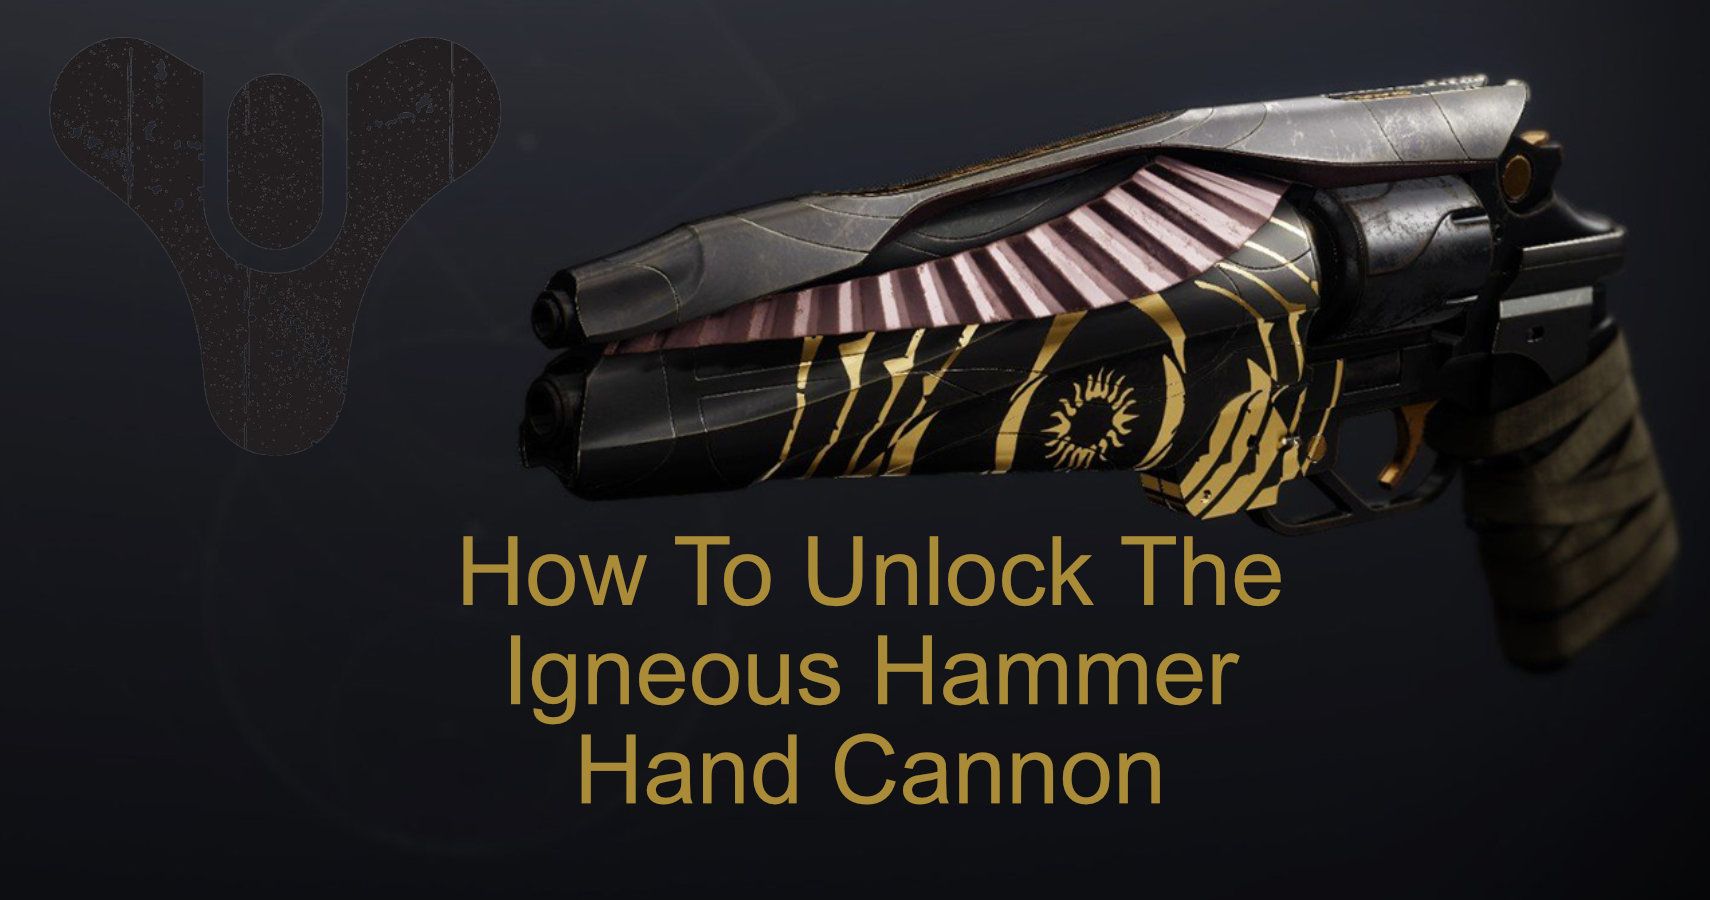 Destiny 2 How To Unlock Igneous Hammer Hand Cannon